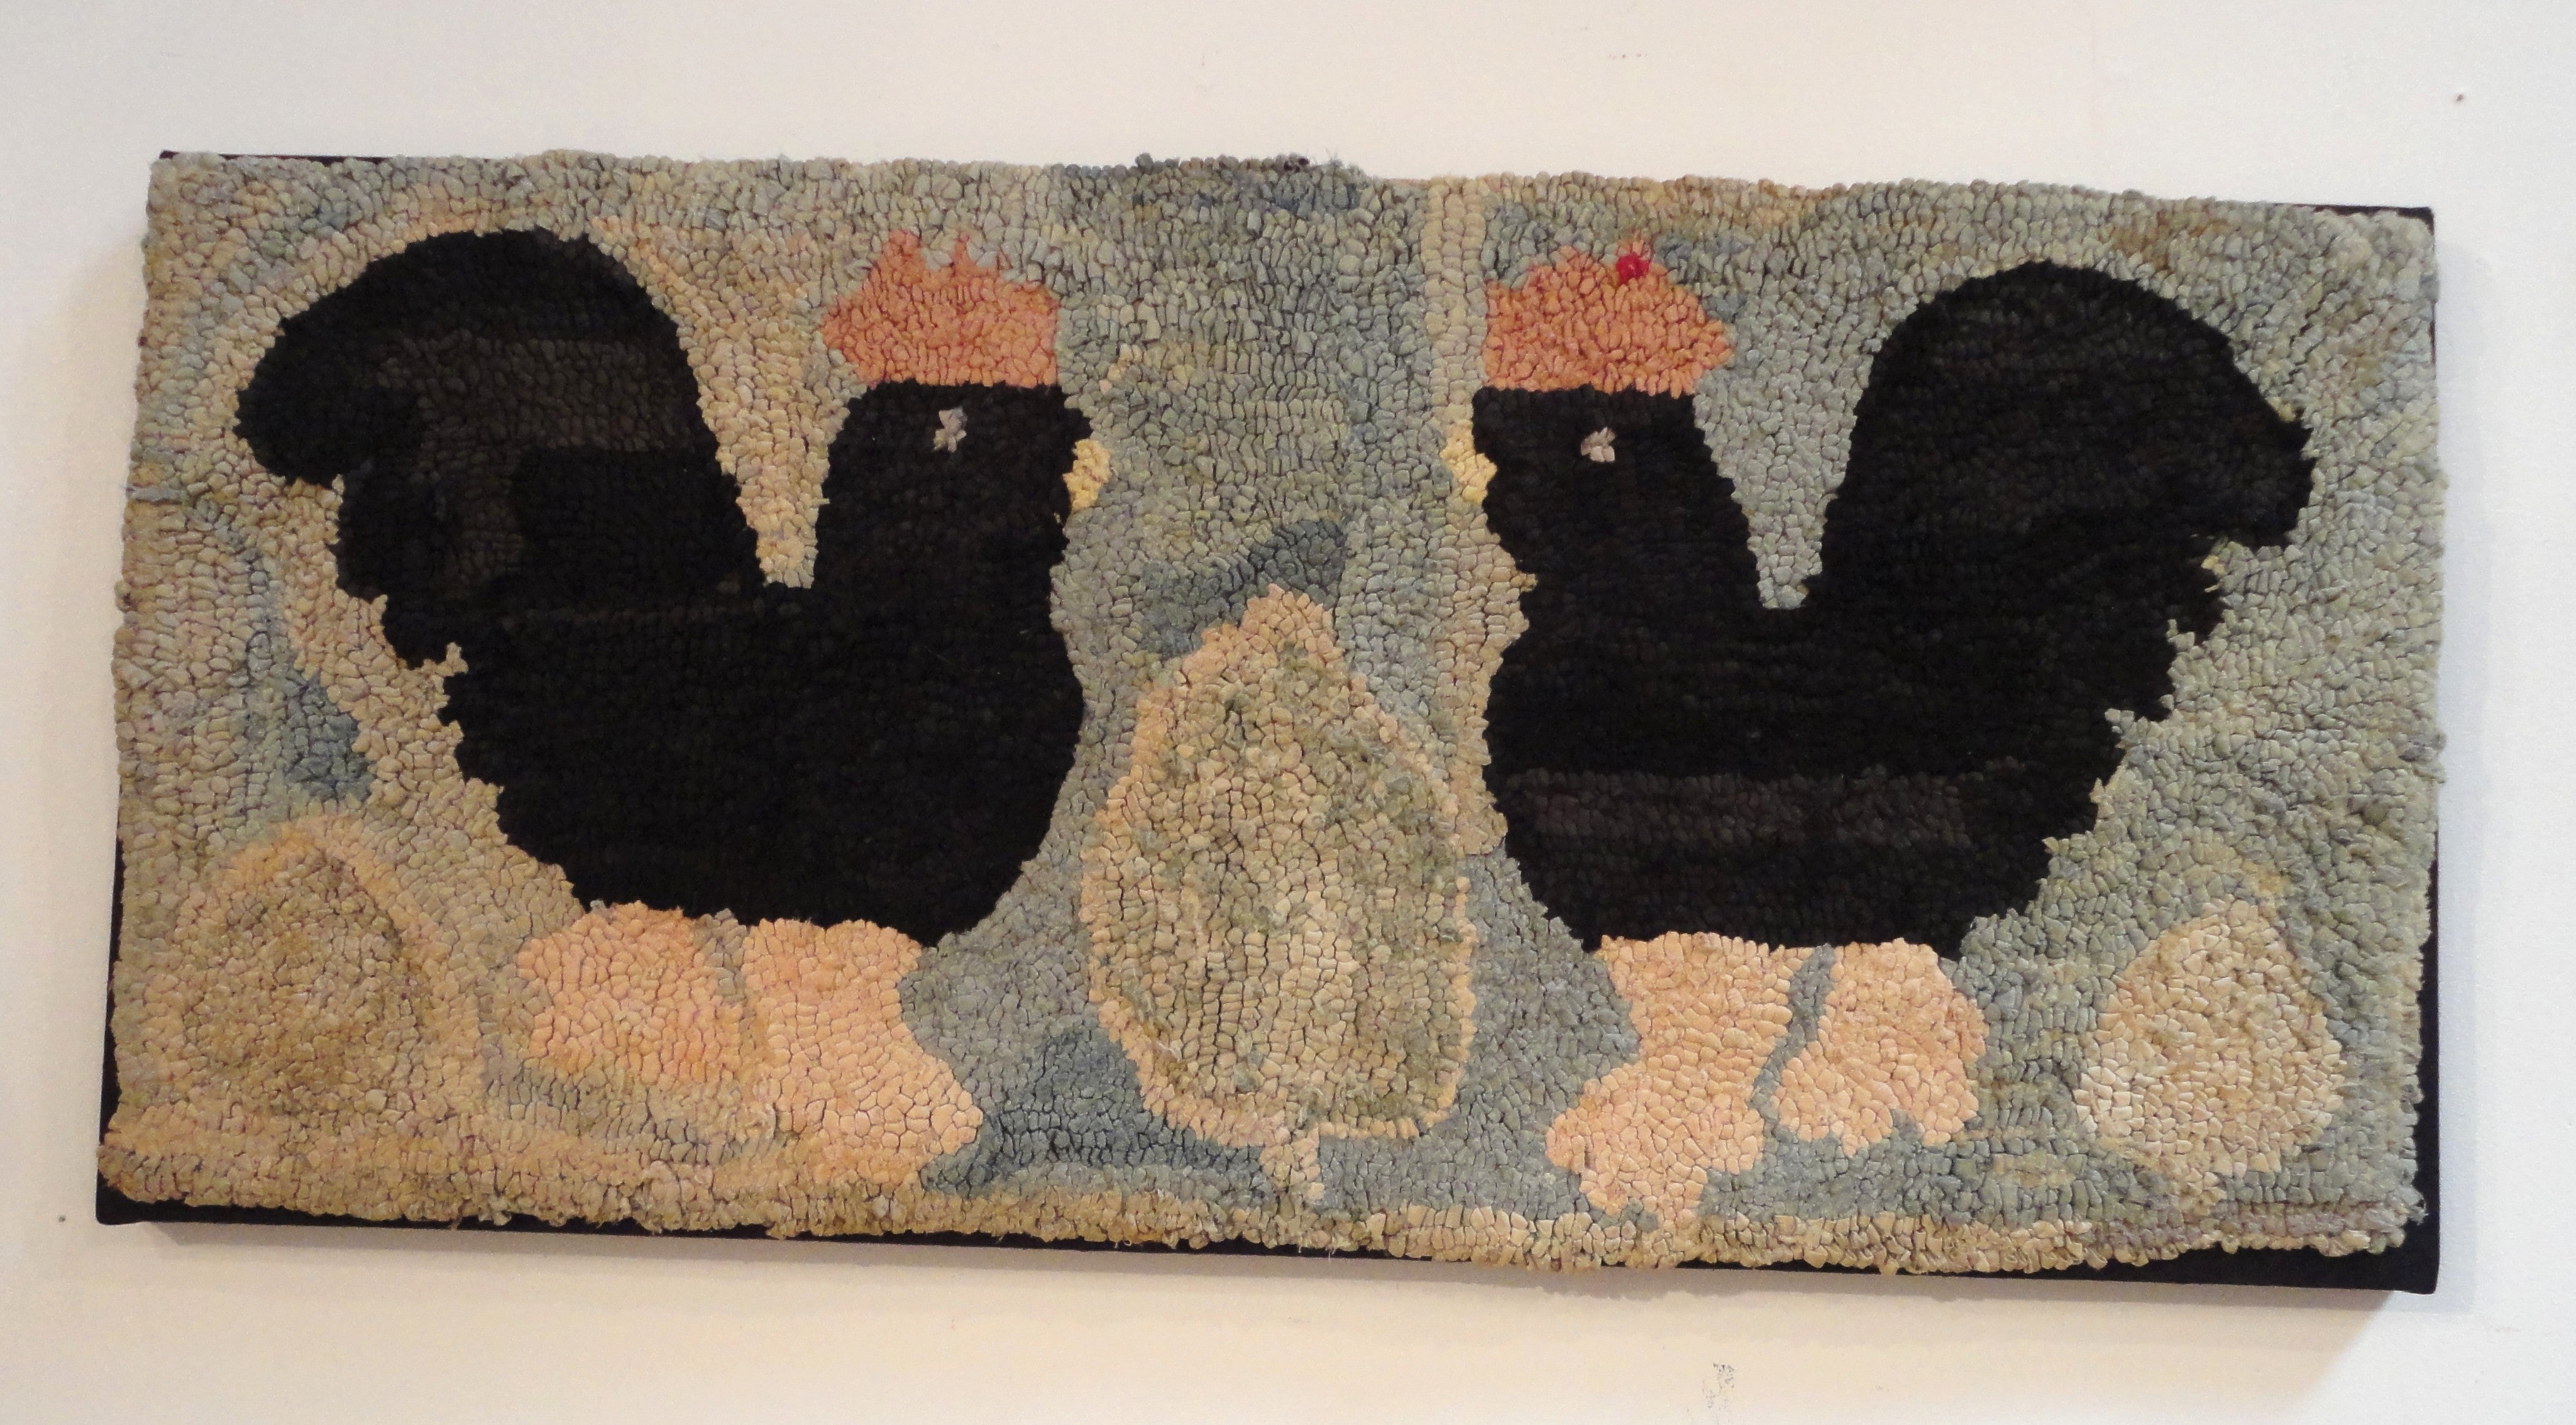 Folky Hand-Hooked Chickens Rug on Mount